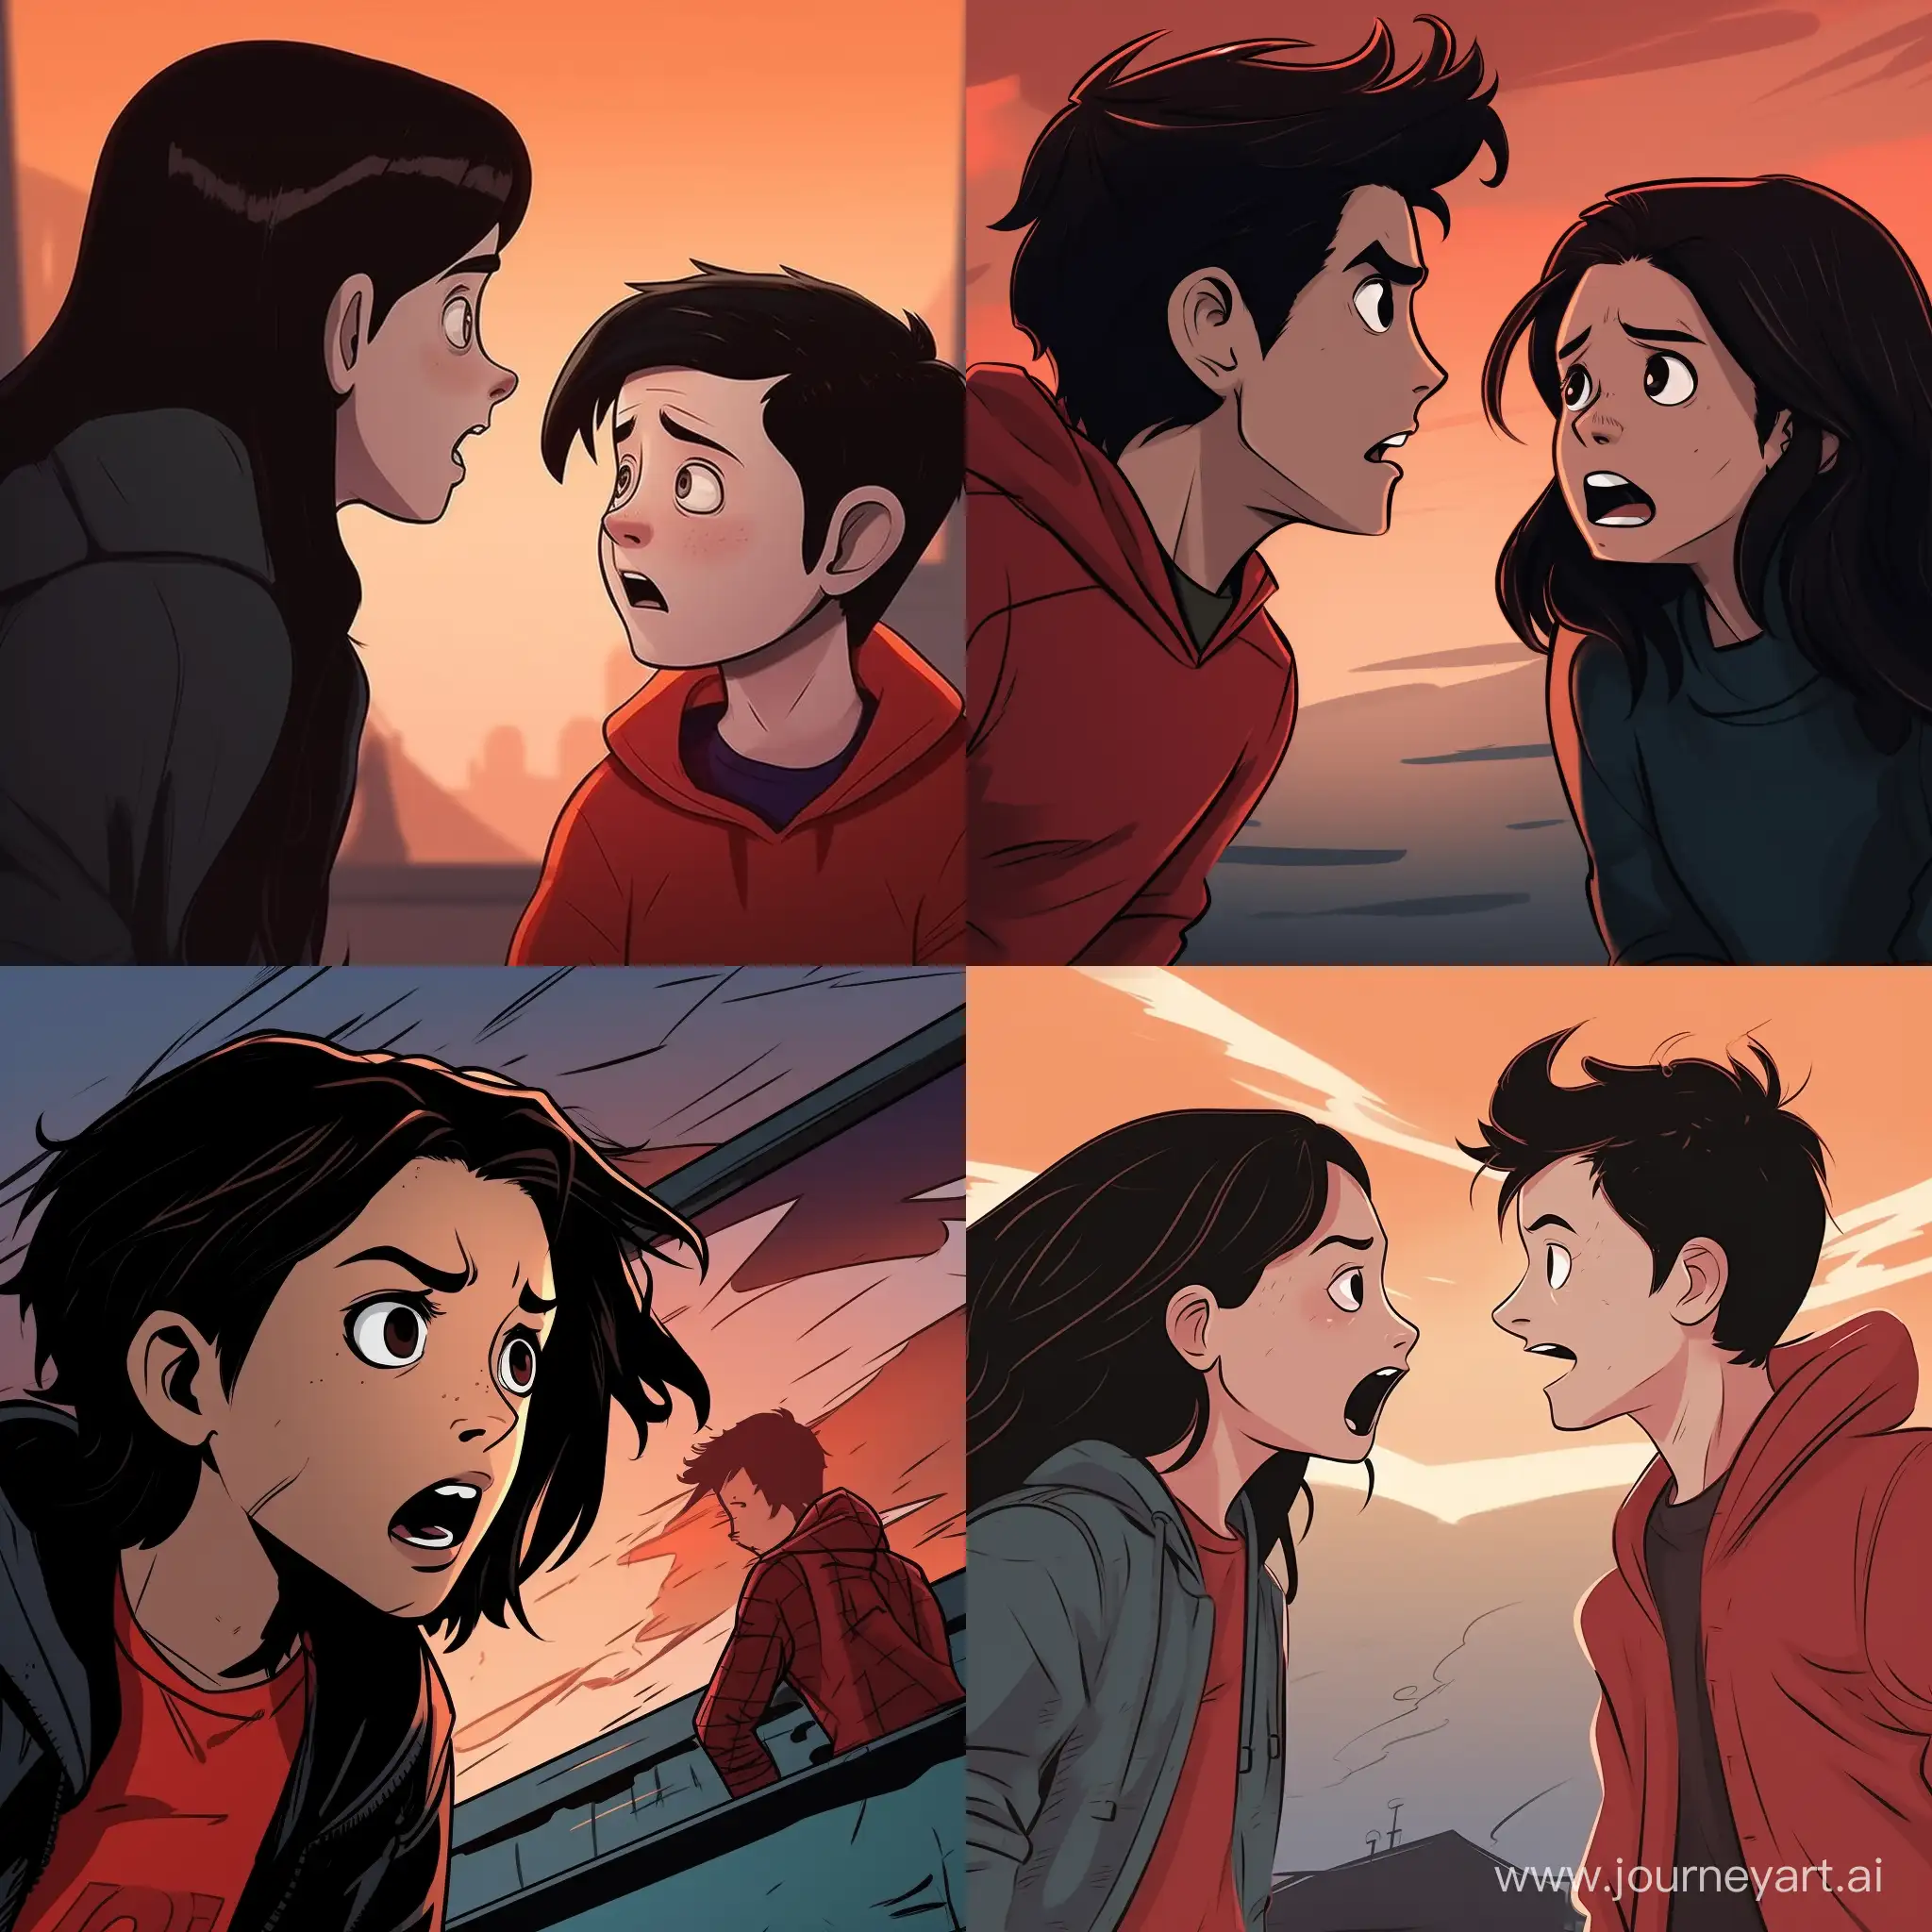 Dramatic-Scene-Boy-in-Red-Sweater-Shouts-at-Crying-Girl-in-Comic-Book-Style